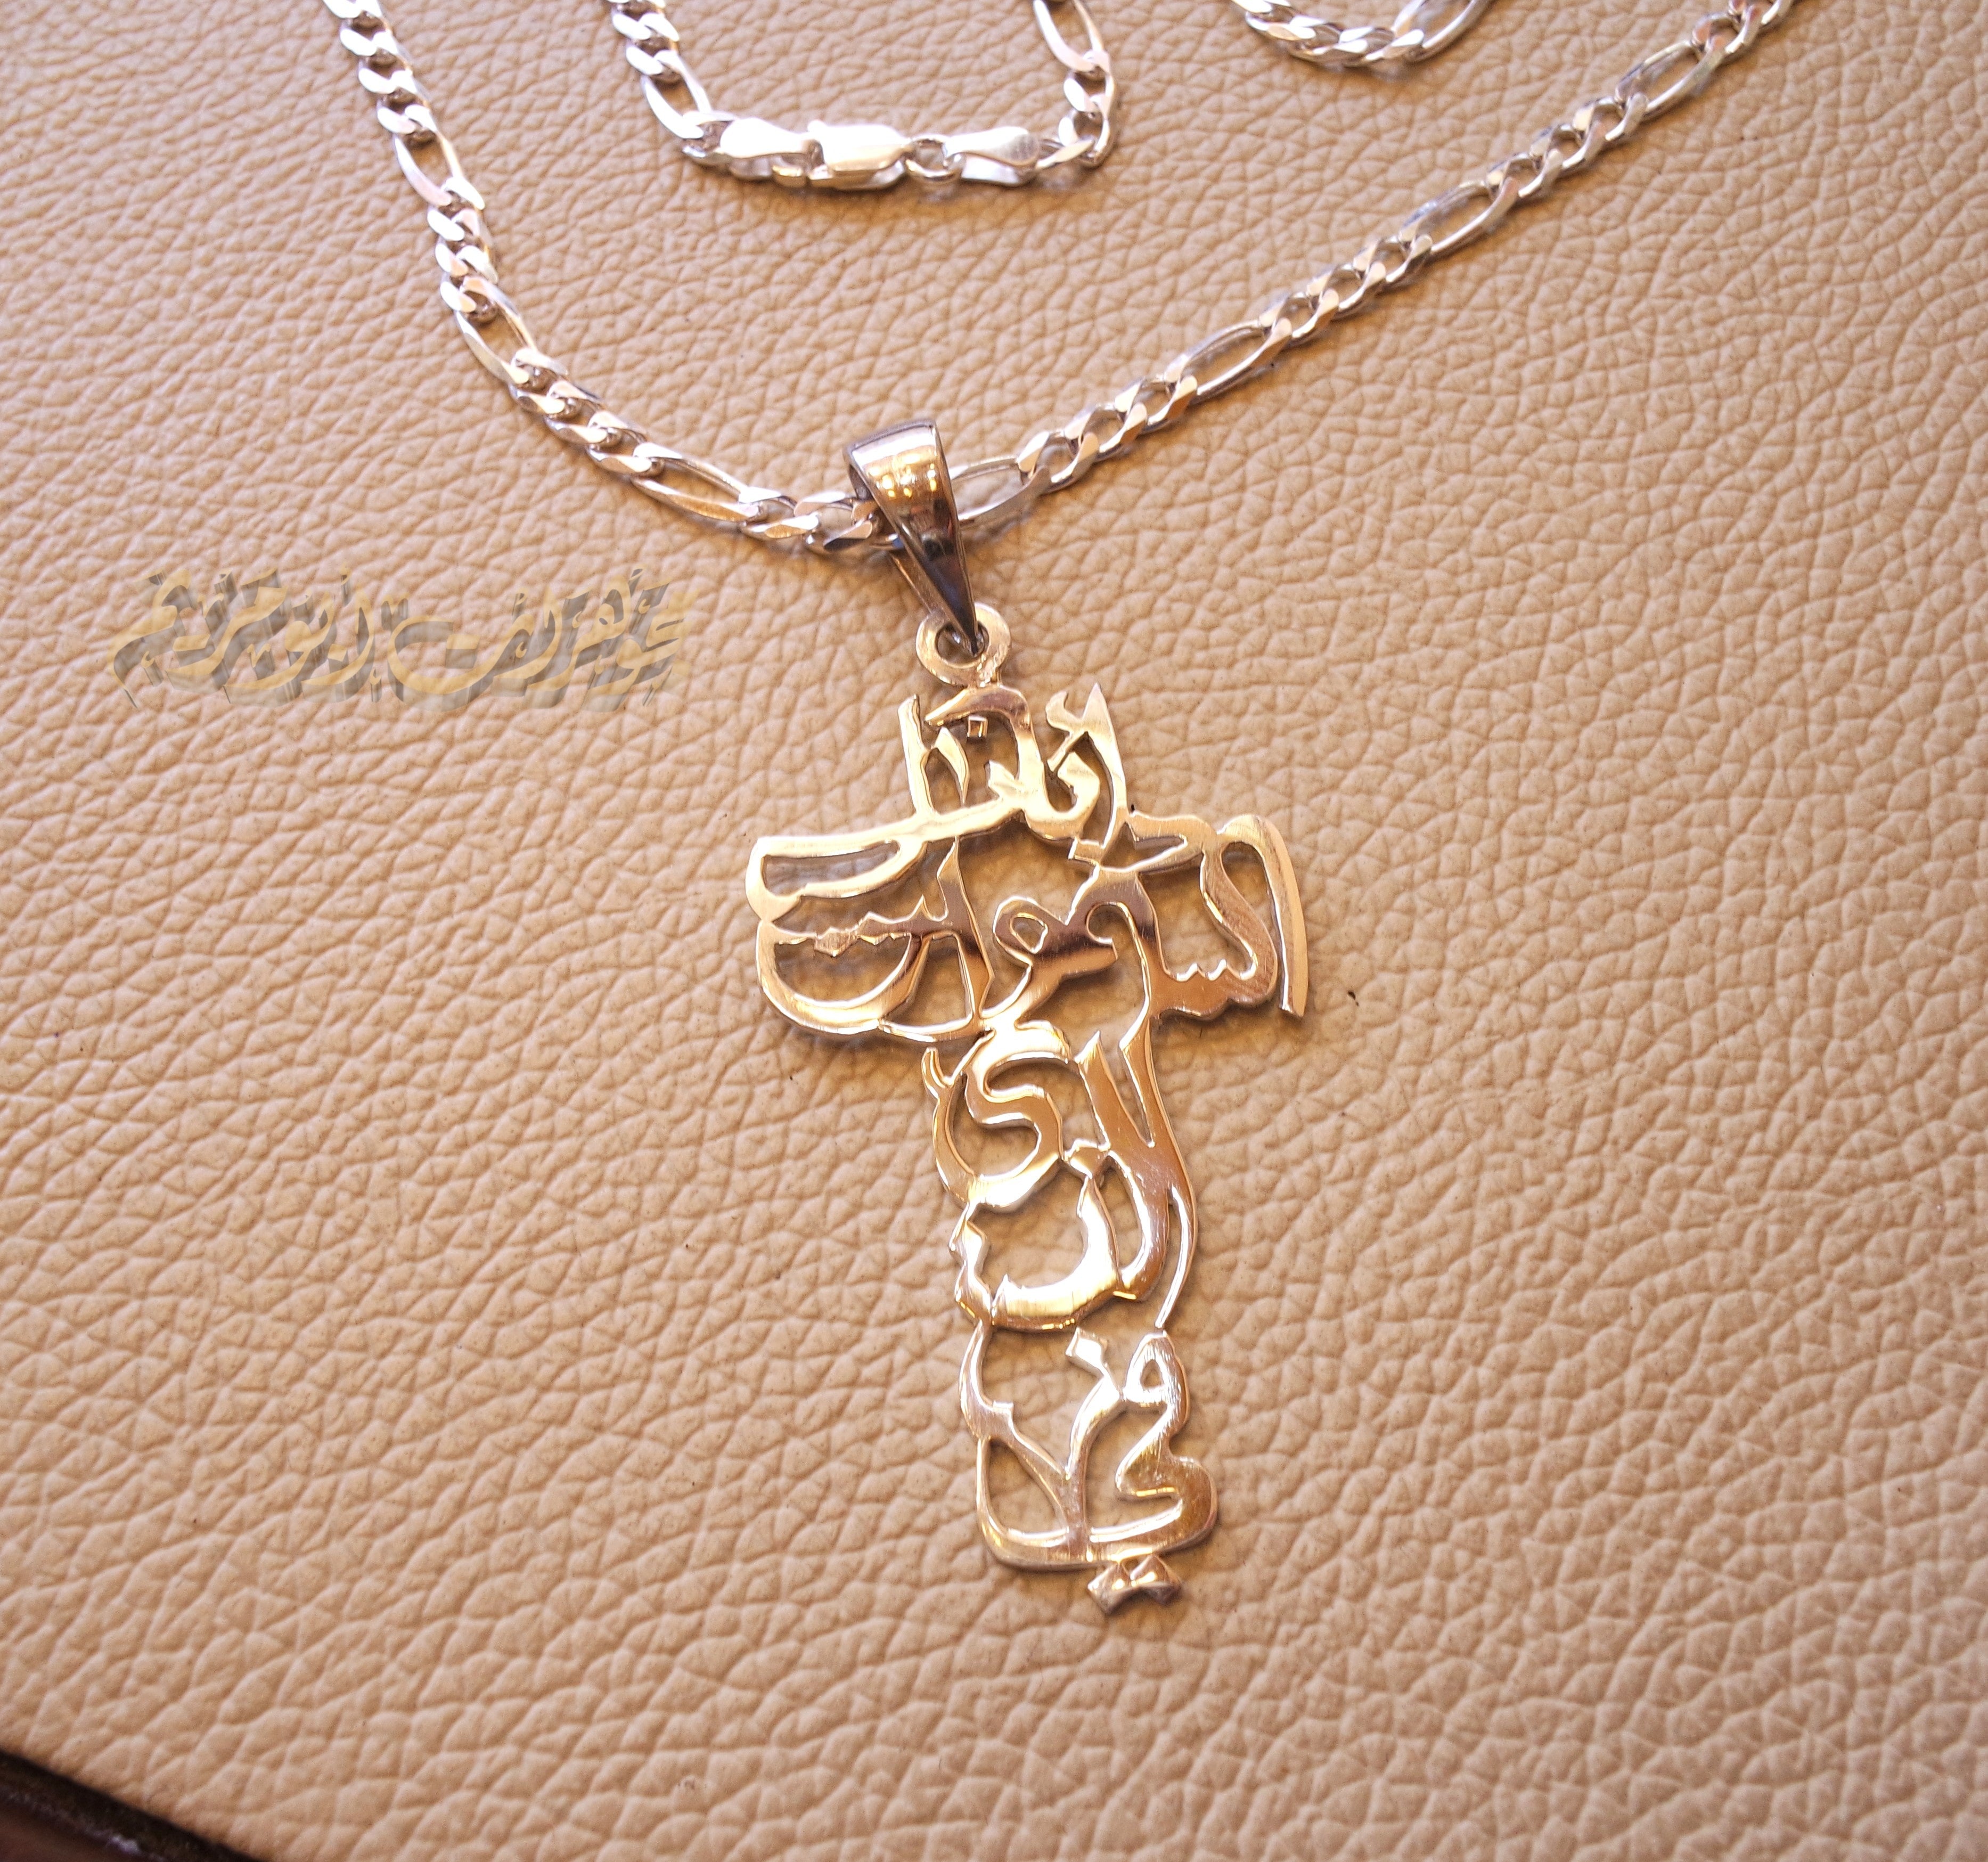 Arabic calligraphy big cross thick chain our father who art in heaven pendant sterling silver 925 catholic orthodox Christianity handmade